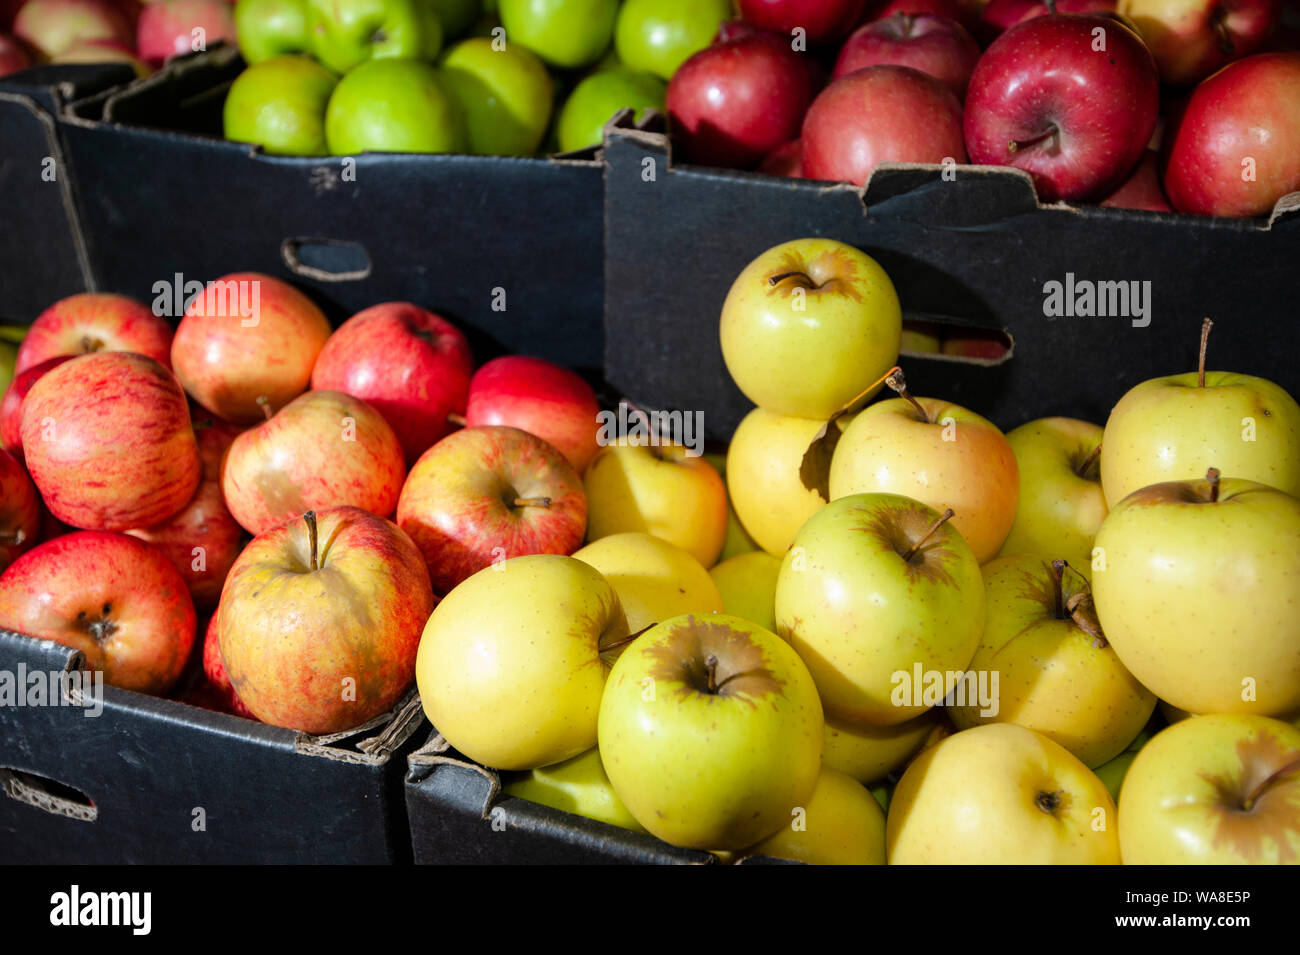 Organic red, green and yellow varieties of apples including Granny Smith, Golden Delicious and Jonathan for sale at a farmers market in Victoria Australia Stock Photo